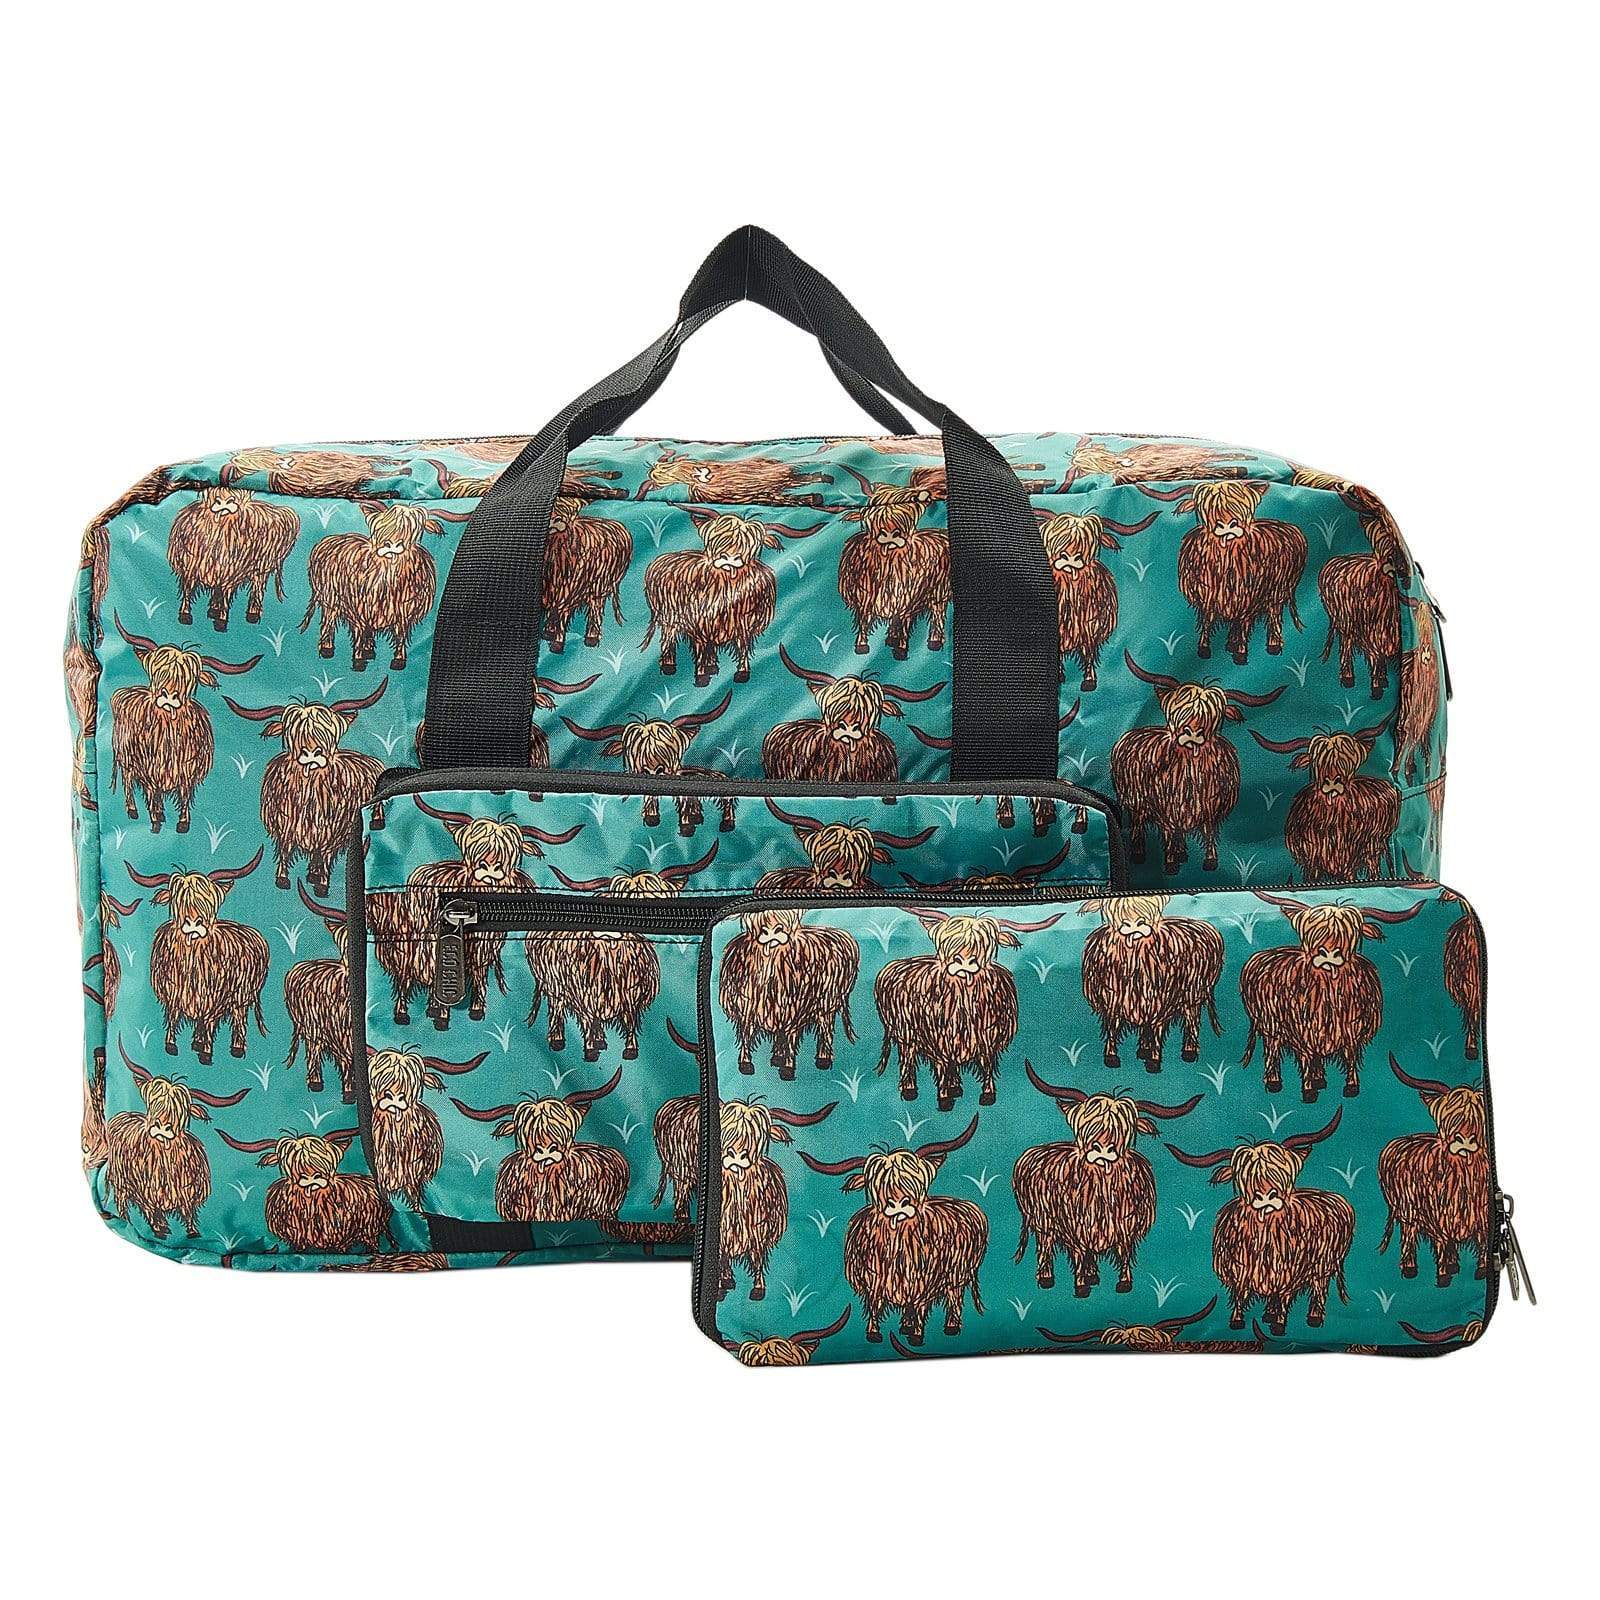 Eco Chic Teal Eco Chic Lightweight Foldable Holdall Highland Cow